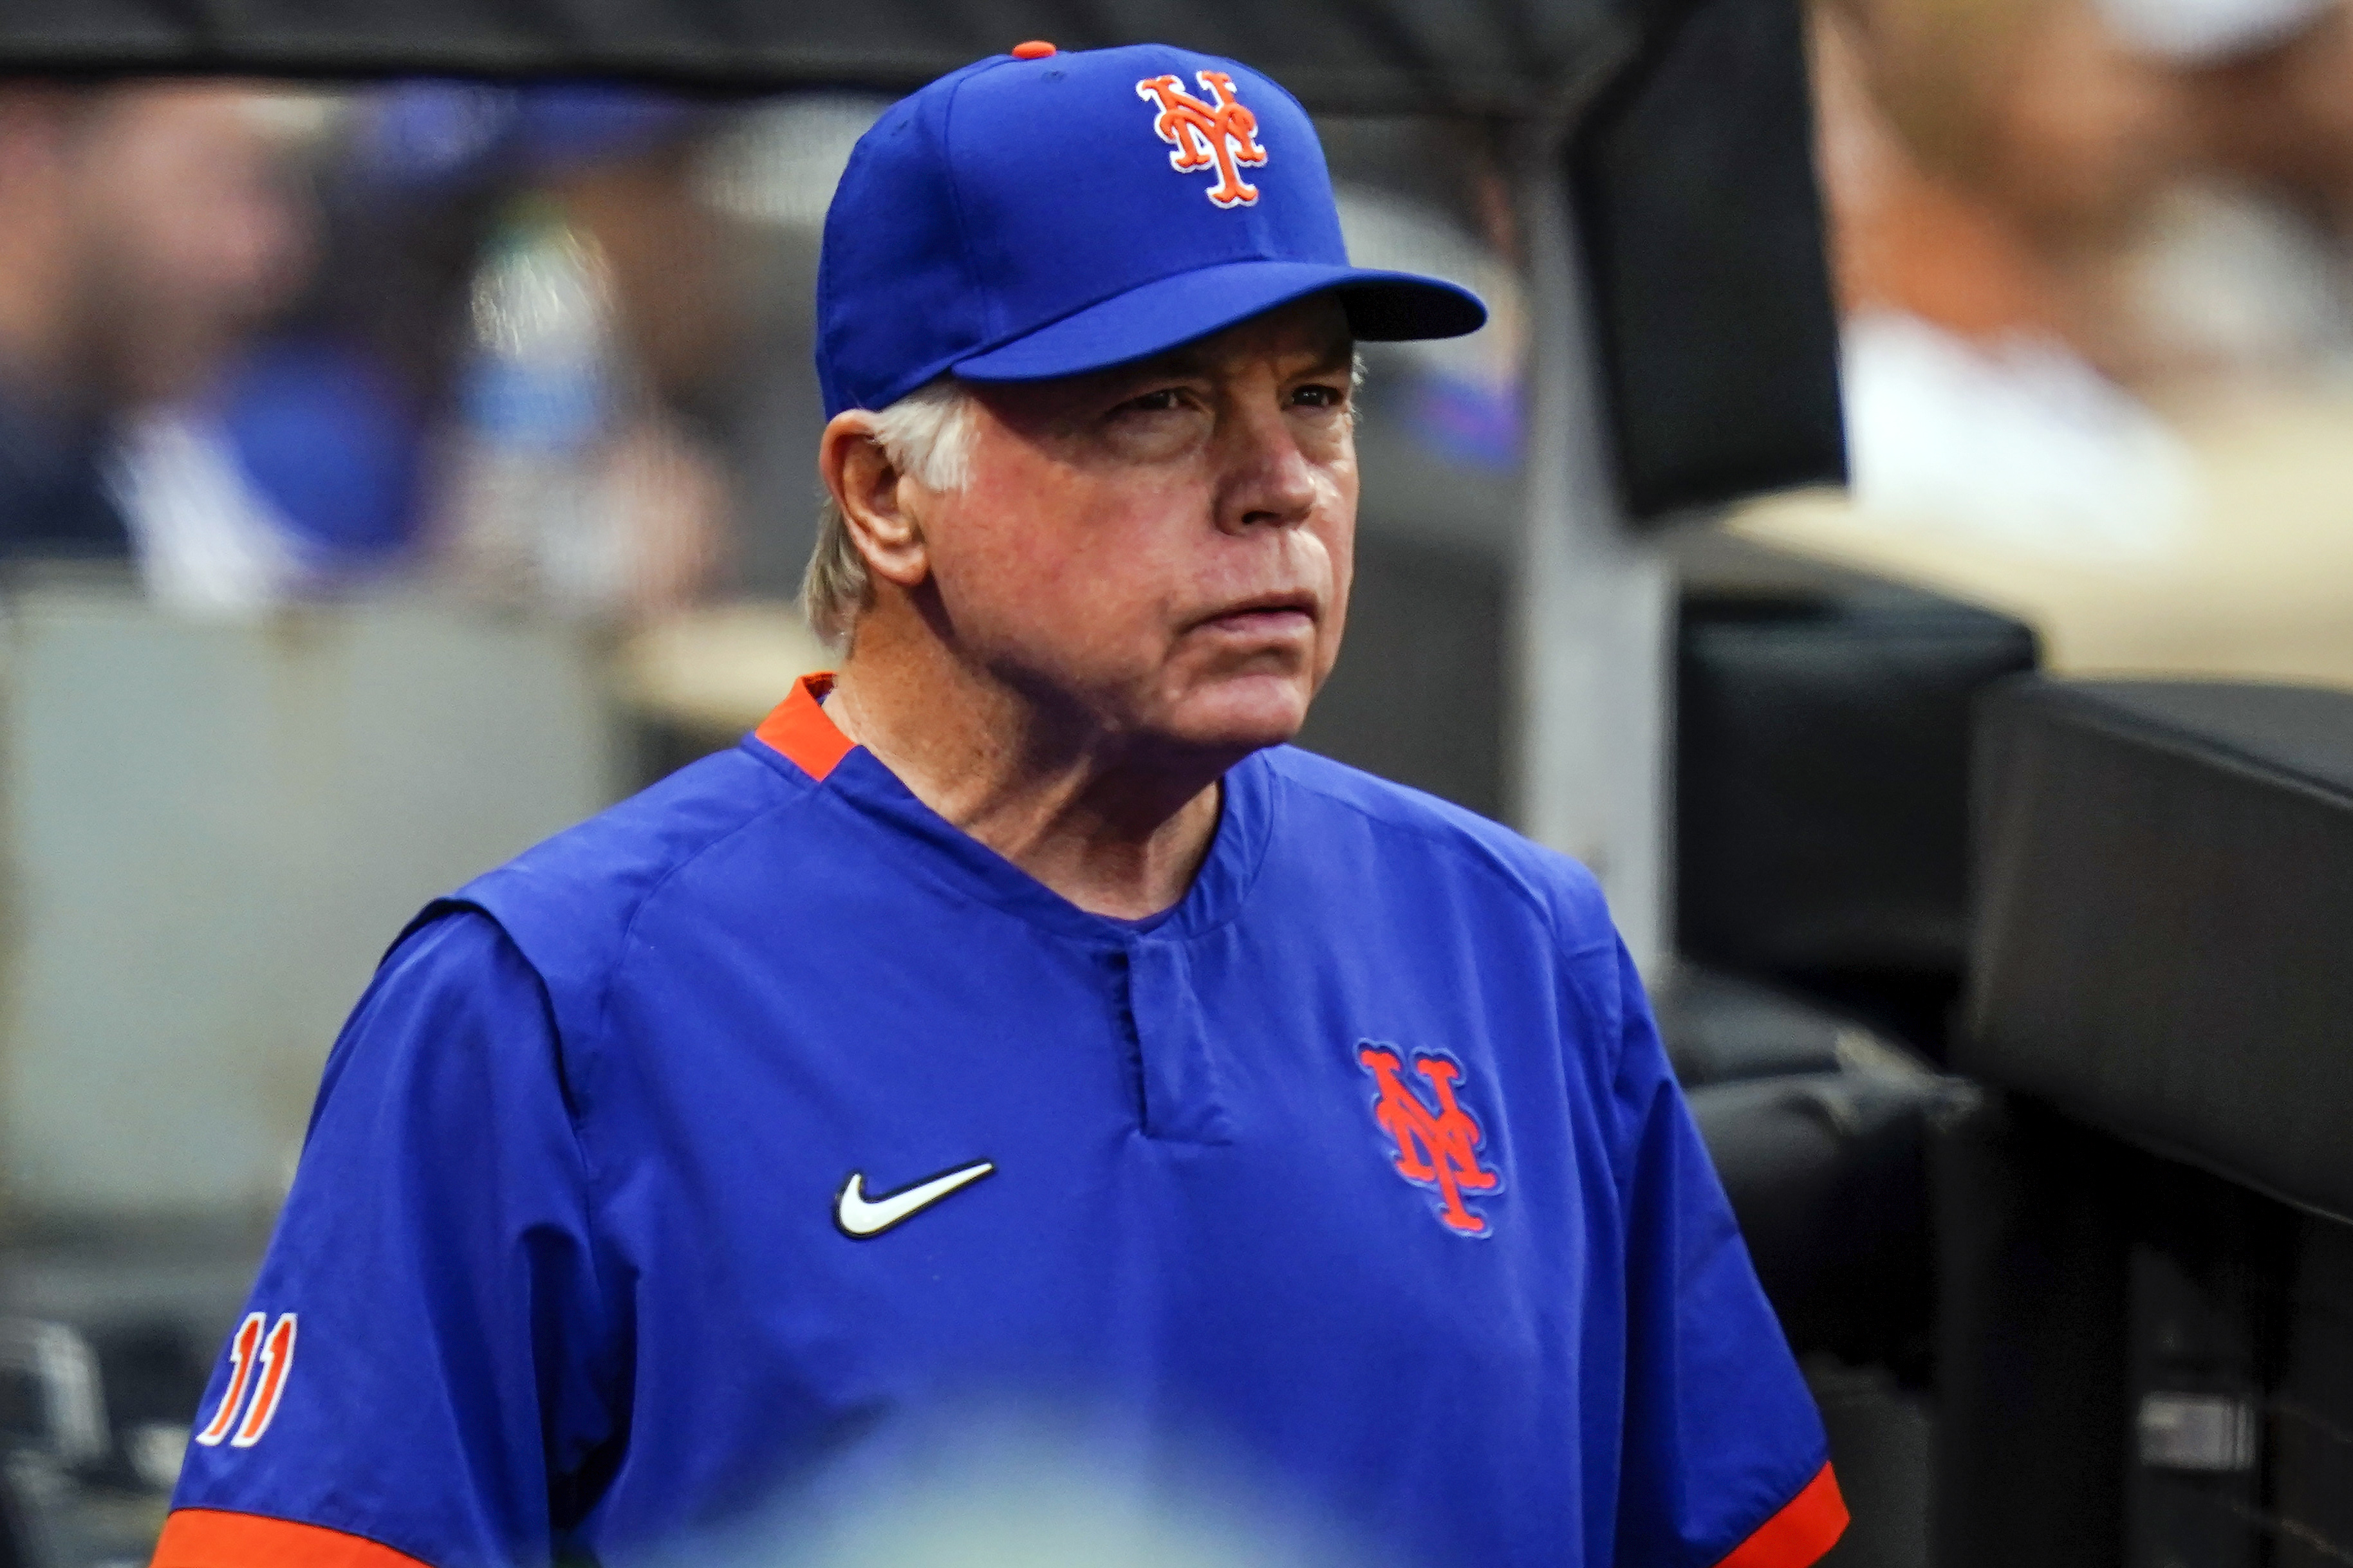 Mets News: Mets introduce Showalter at news conference - Amazin' Avenue